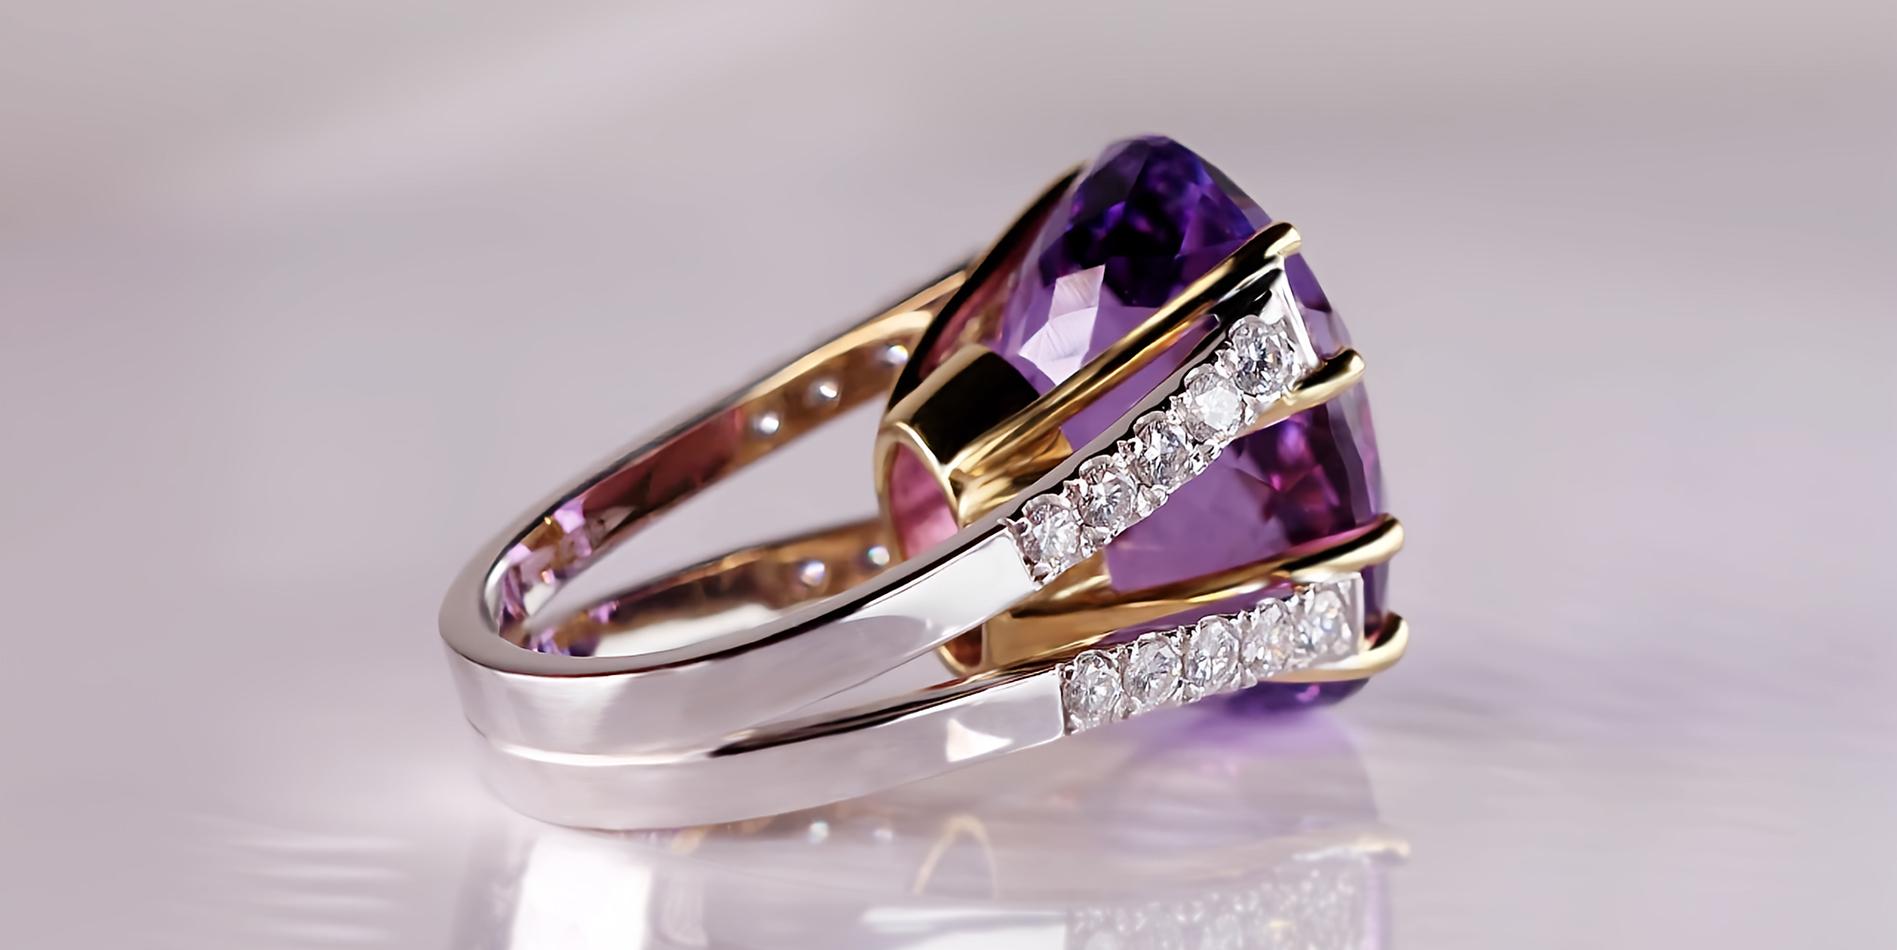 Statement 39.25 ct Amethyst & 1.03 ct Diamond Ring in Elegant 18kt White & Yello In New Condition For Sale In Lugano, CH